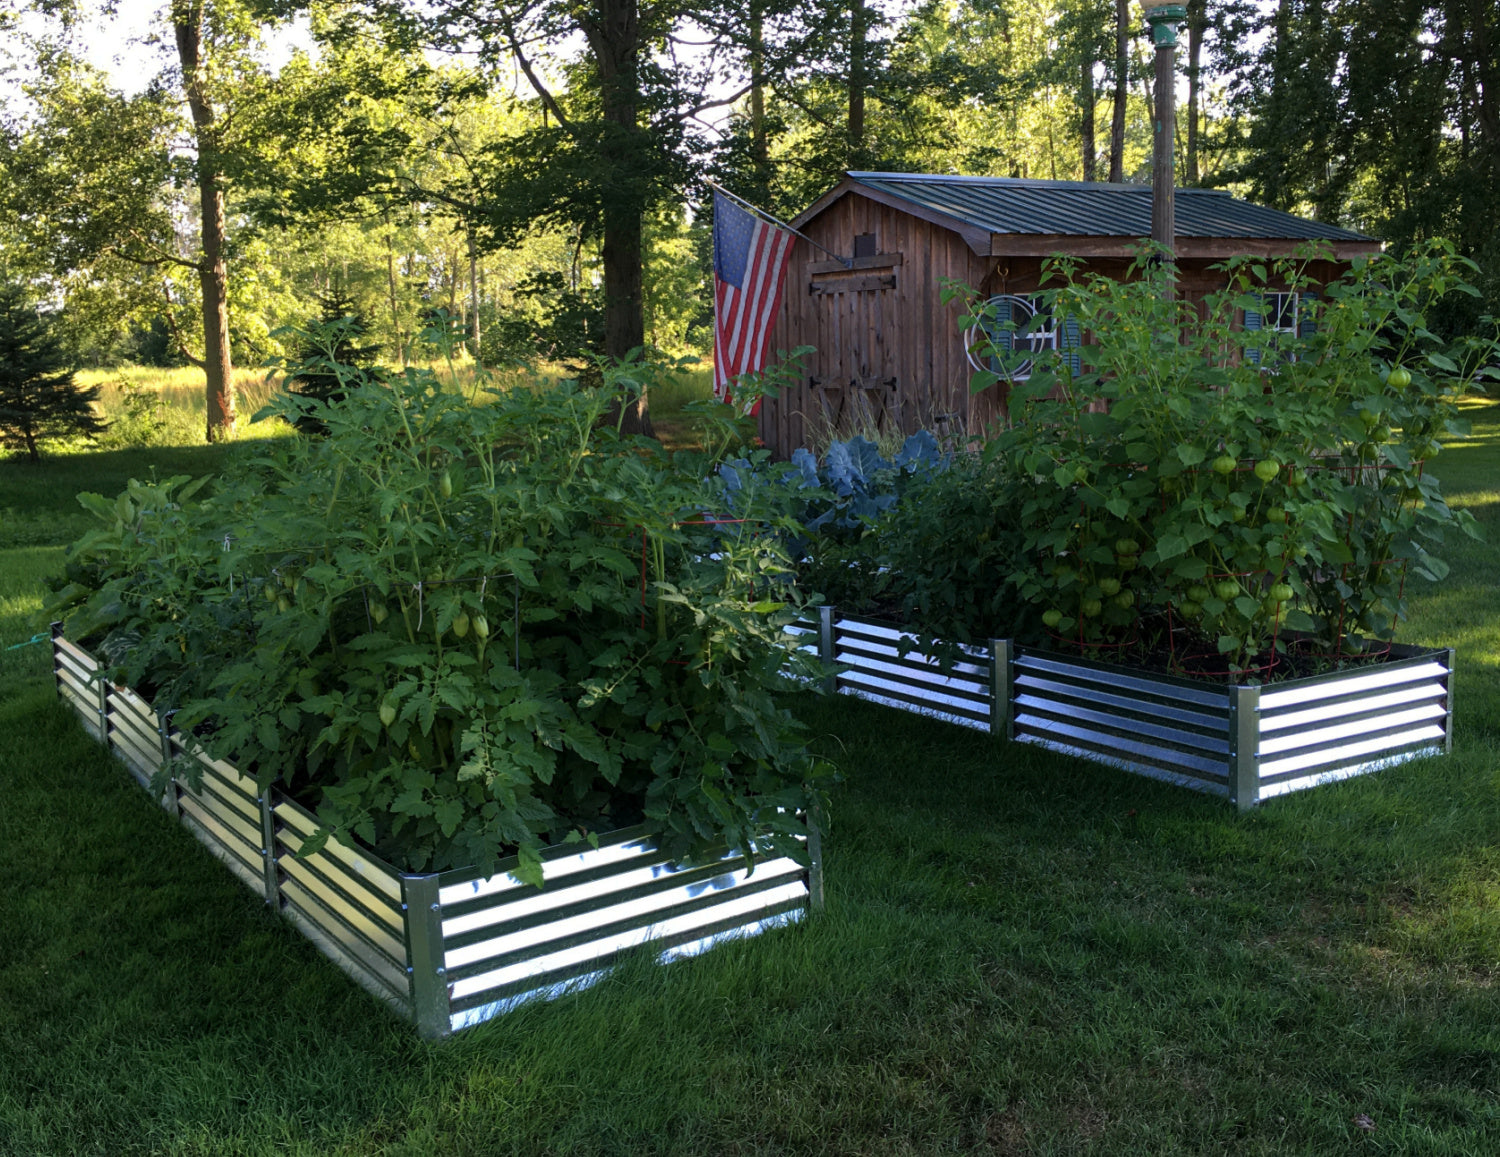 fresa garden beds in a lush forest with tomatoes